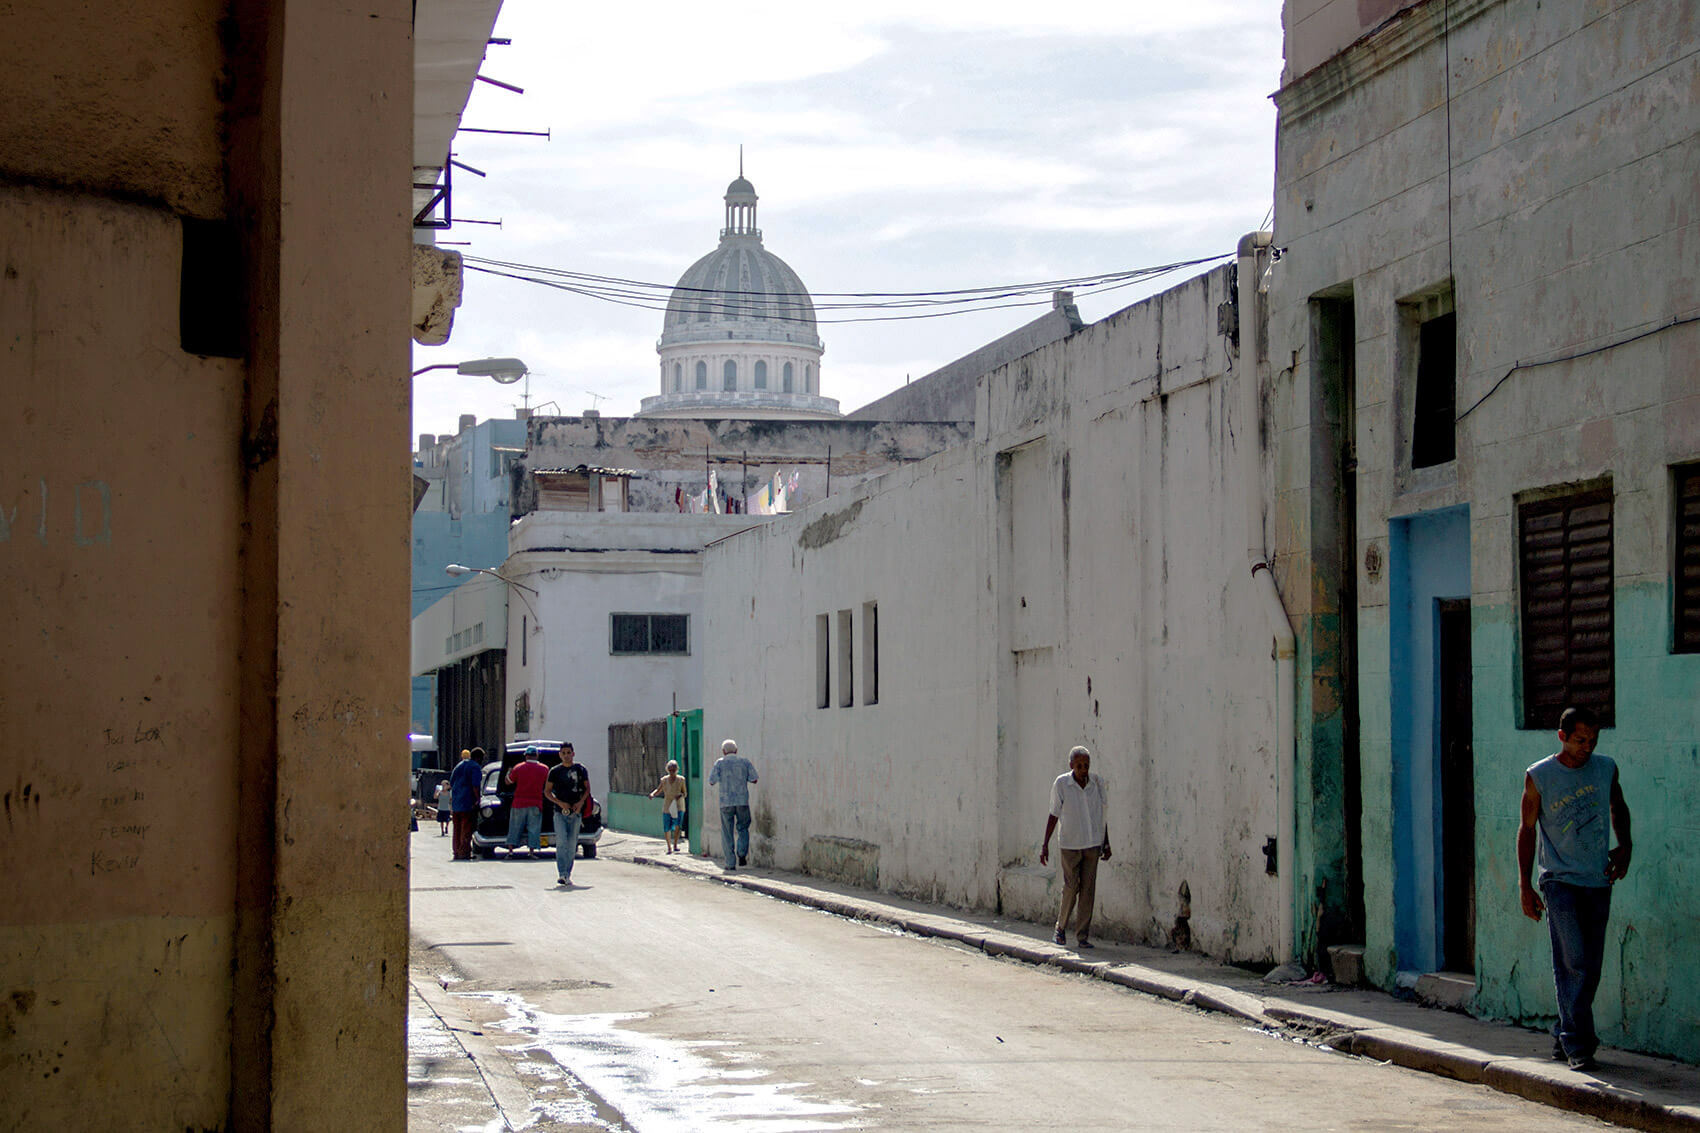 Street of Havana with Capital dome view.